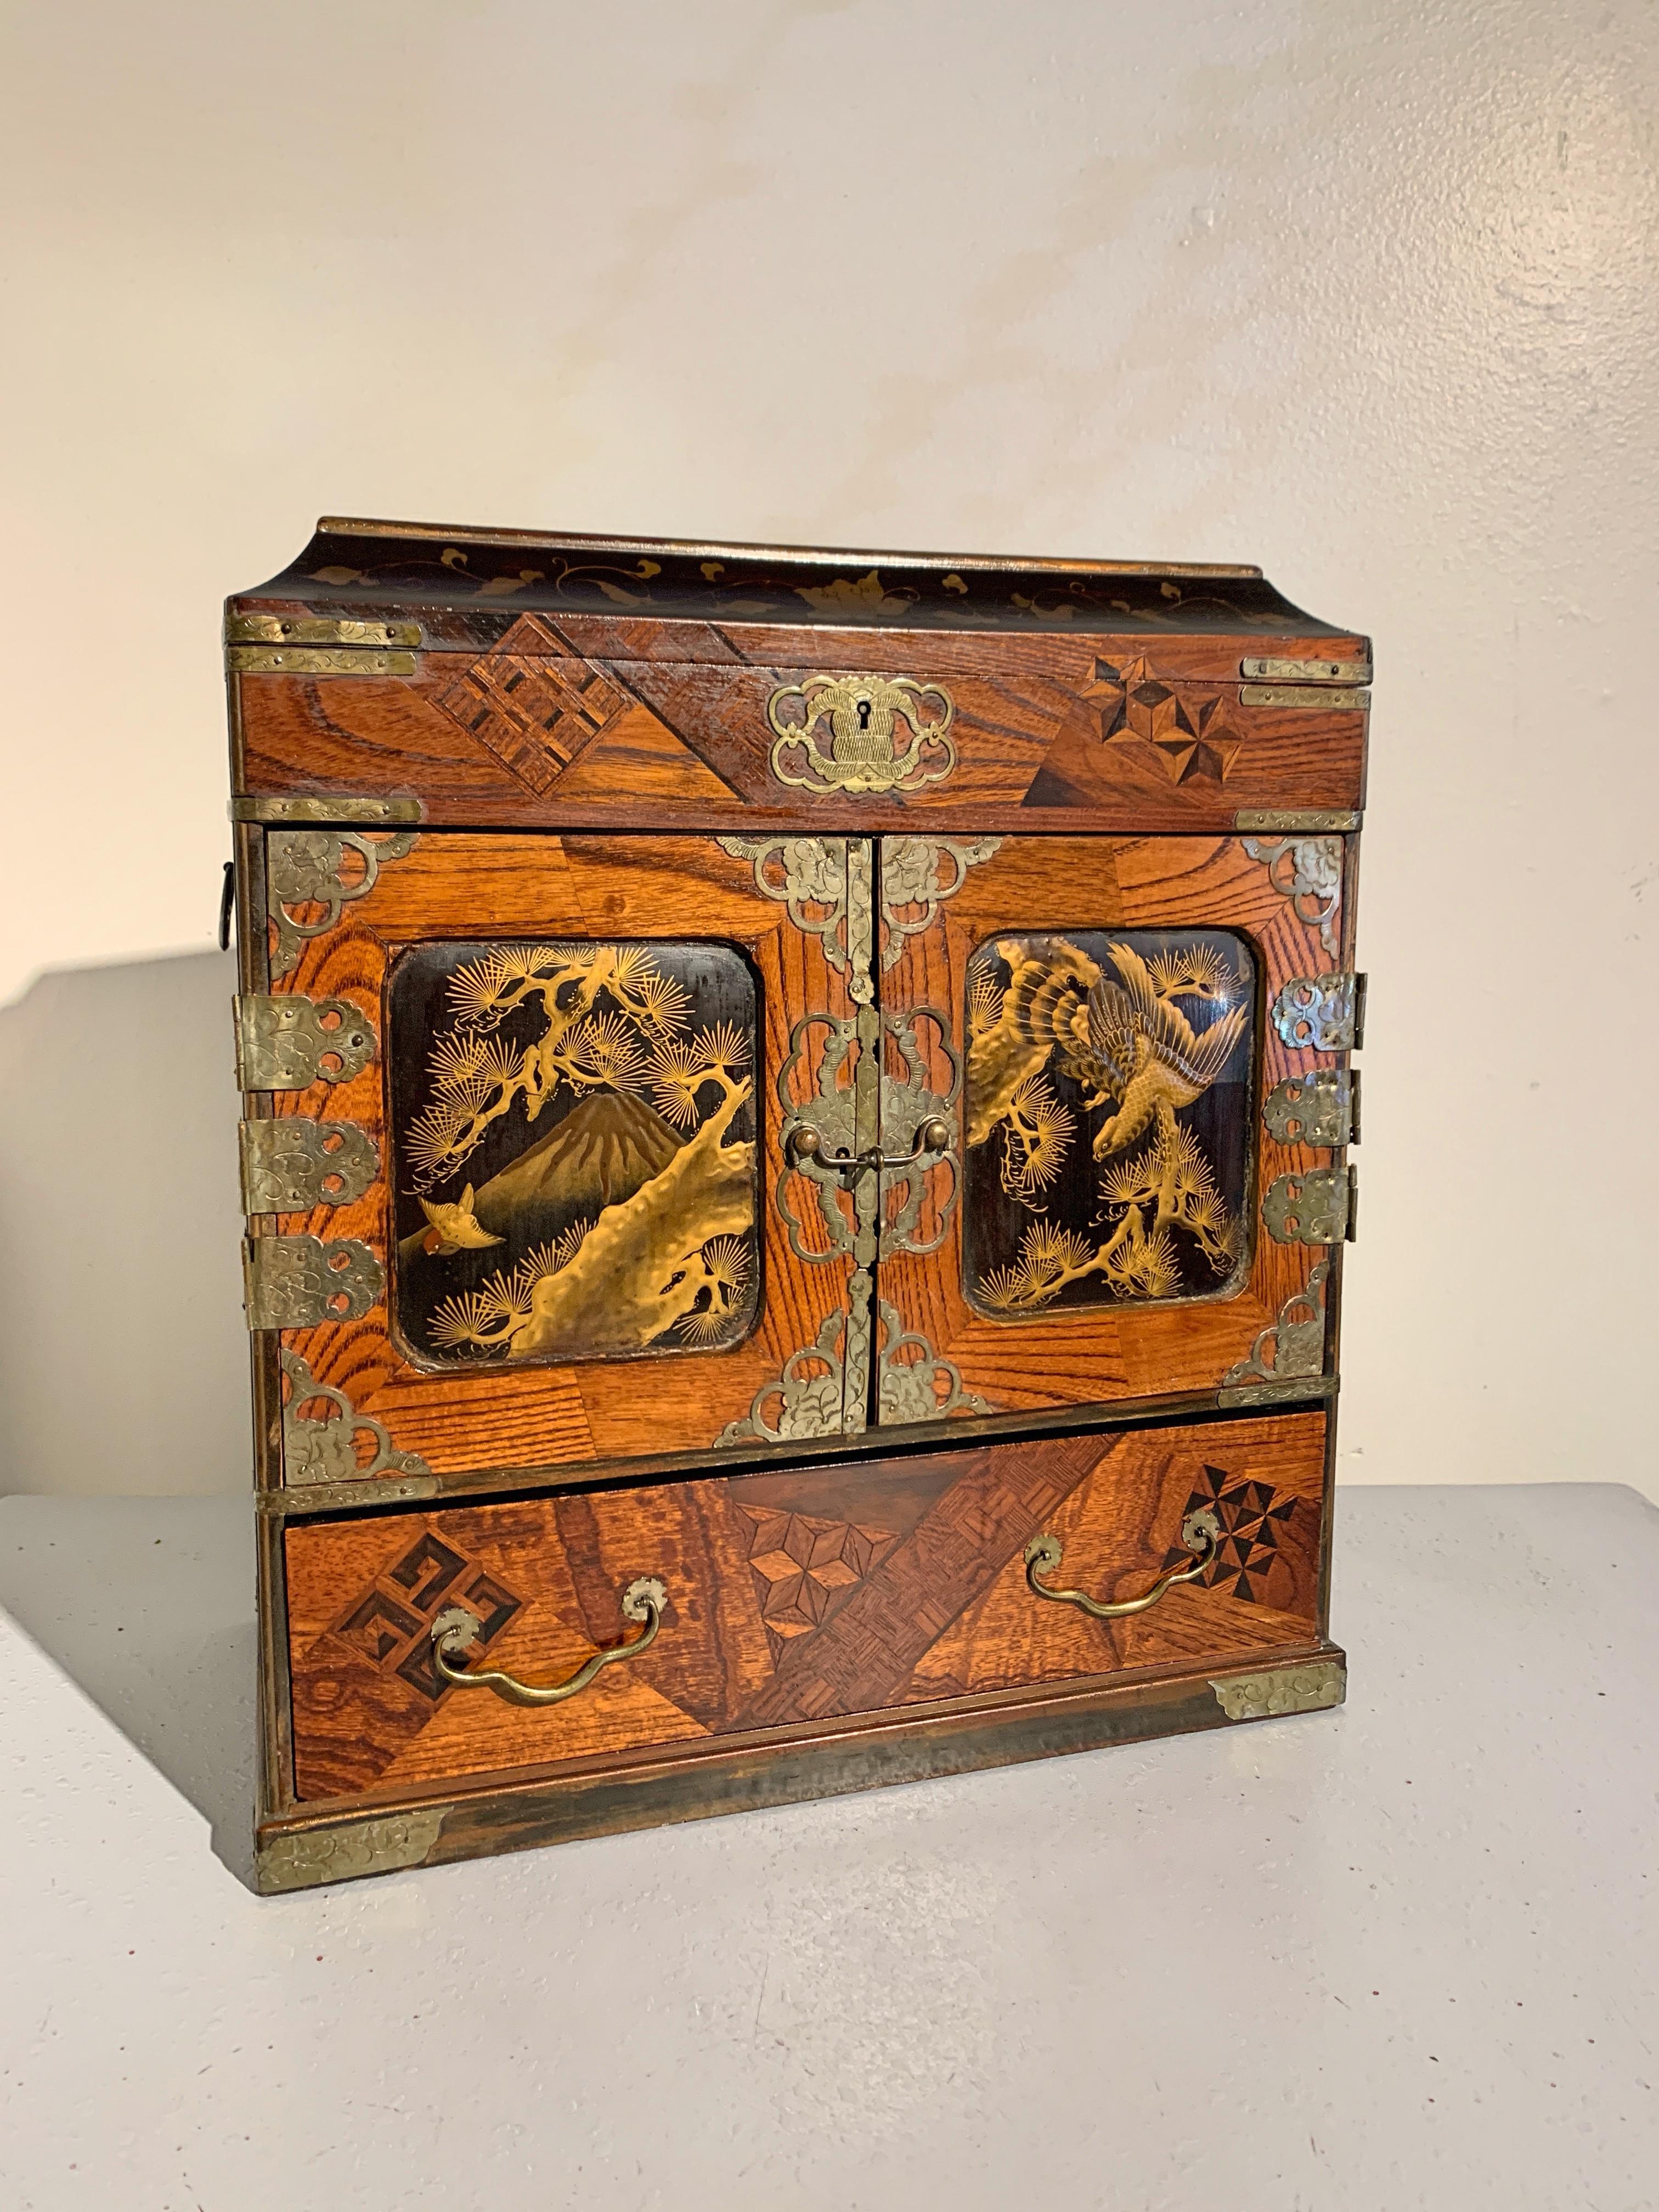 A beautiful Japanese wood table top jewelry or collector's chest with marquetry and lacquer decoration, Meiji period, late 19th century, Japan.

The chest is crafted in the form of a Chinese seal chest, a mainstay of the scholar's studio. The